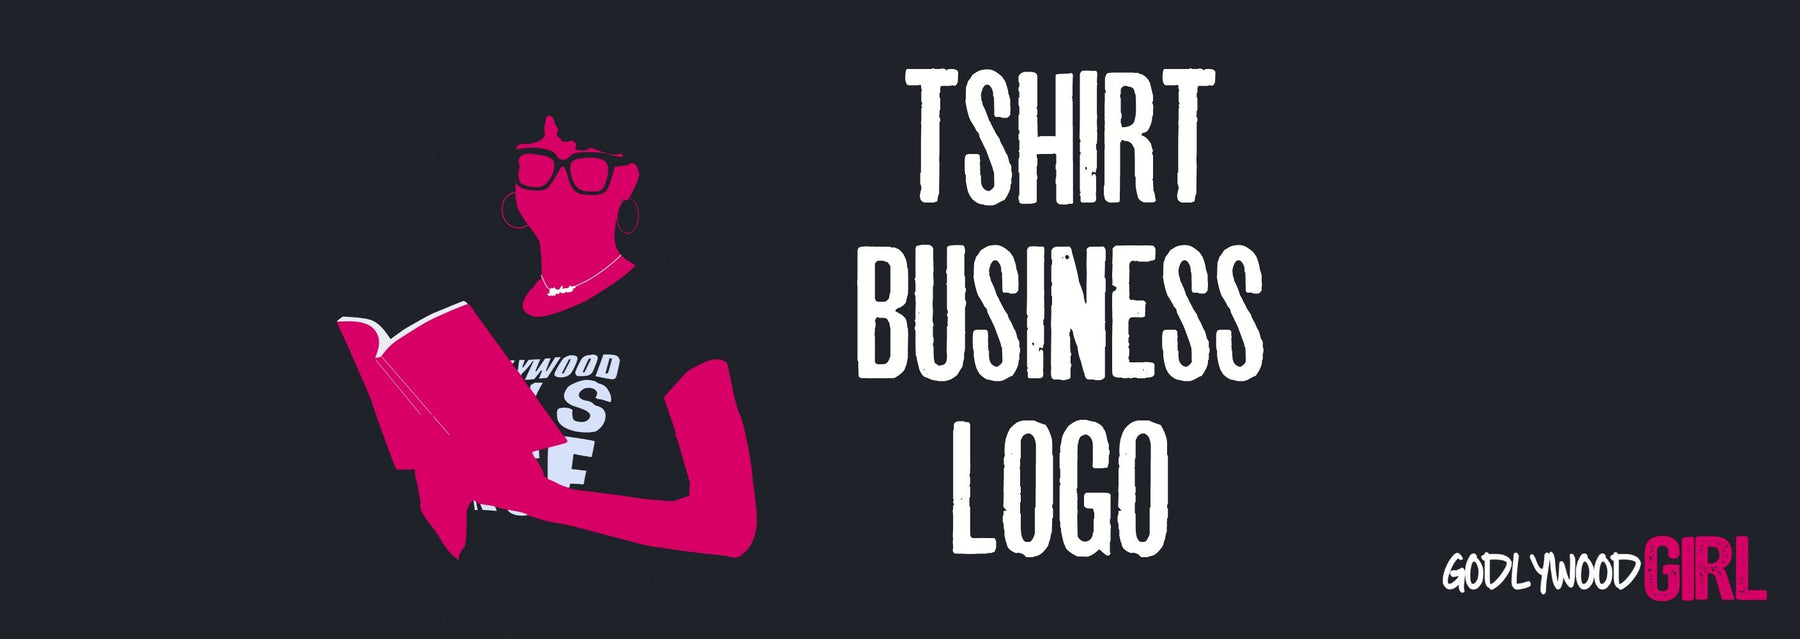 T SHIRT BUSINESS LOGO (How To Design A Logo For Your Christian T-Shirt Business) || HOW TO